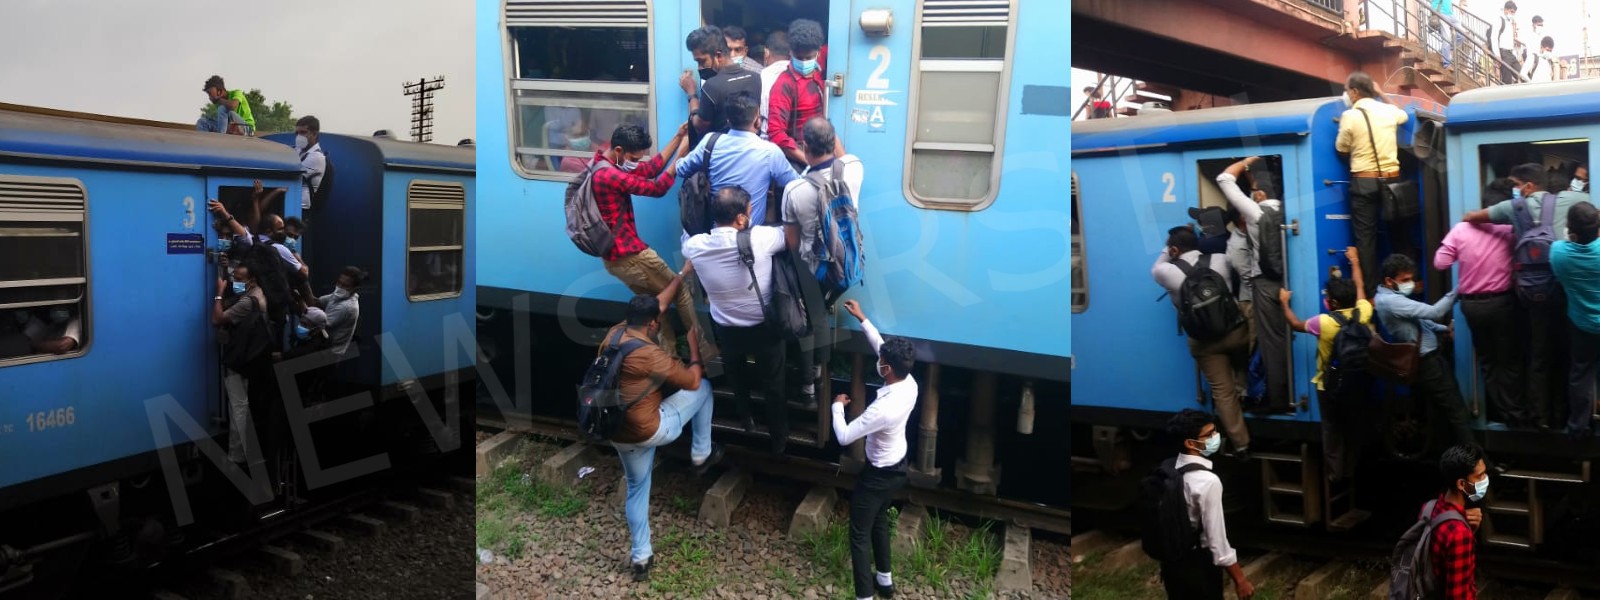 Railway Operations hampered due to Token Strike